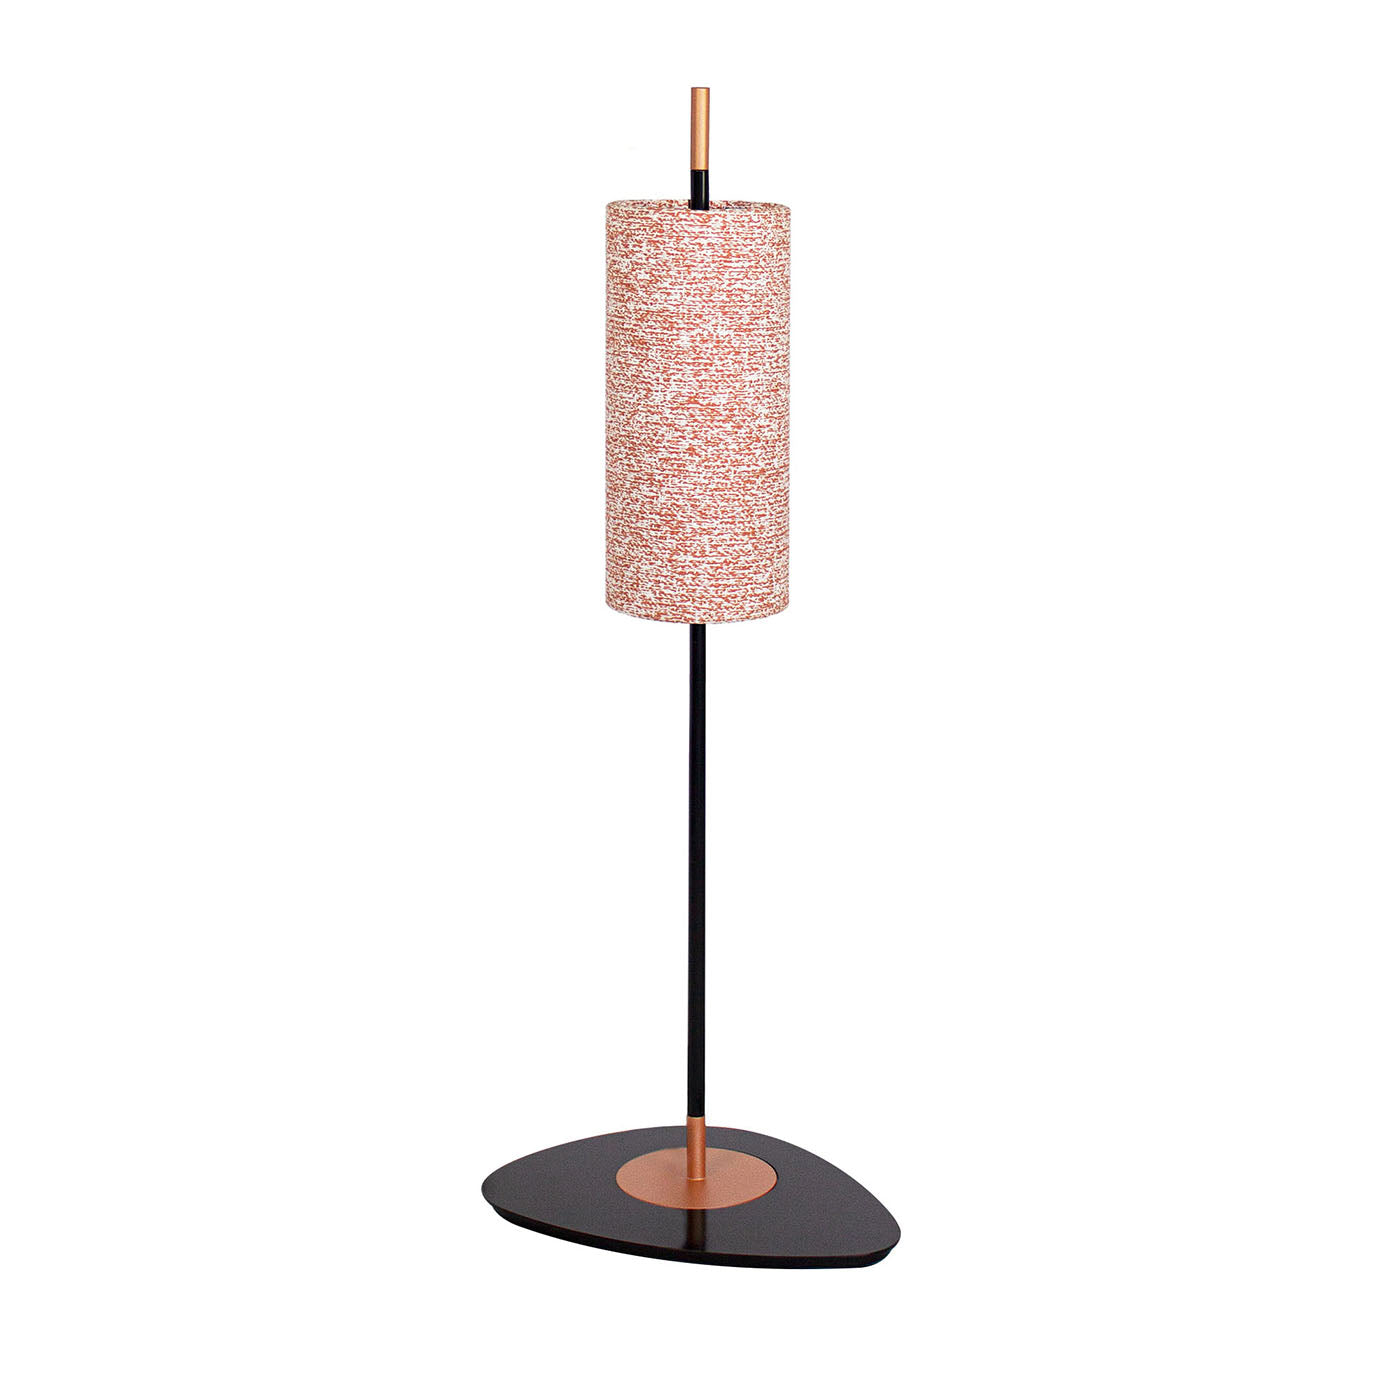 Lagoon Noumea Goyave Small Outdoor Floor Lamp by Servomuto - Main view